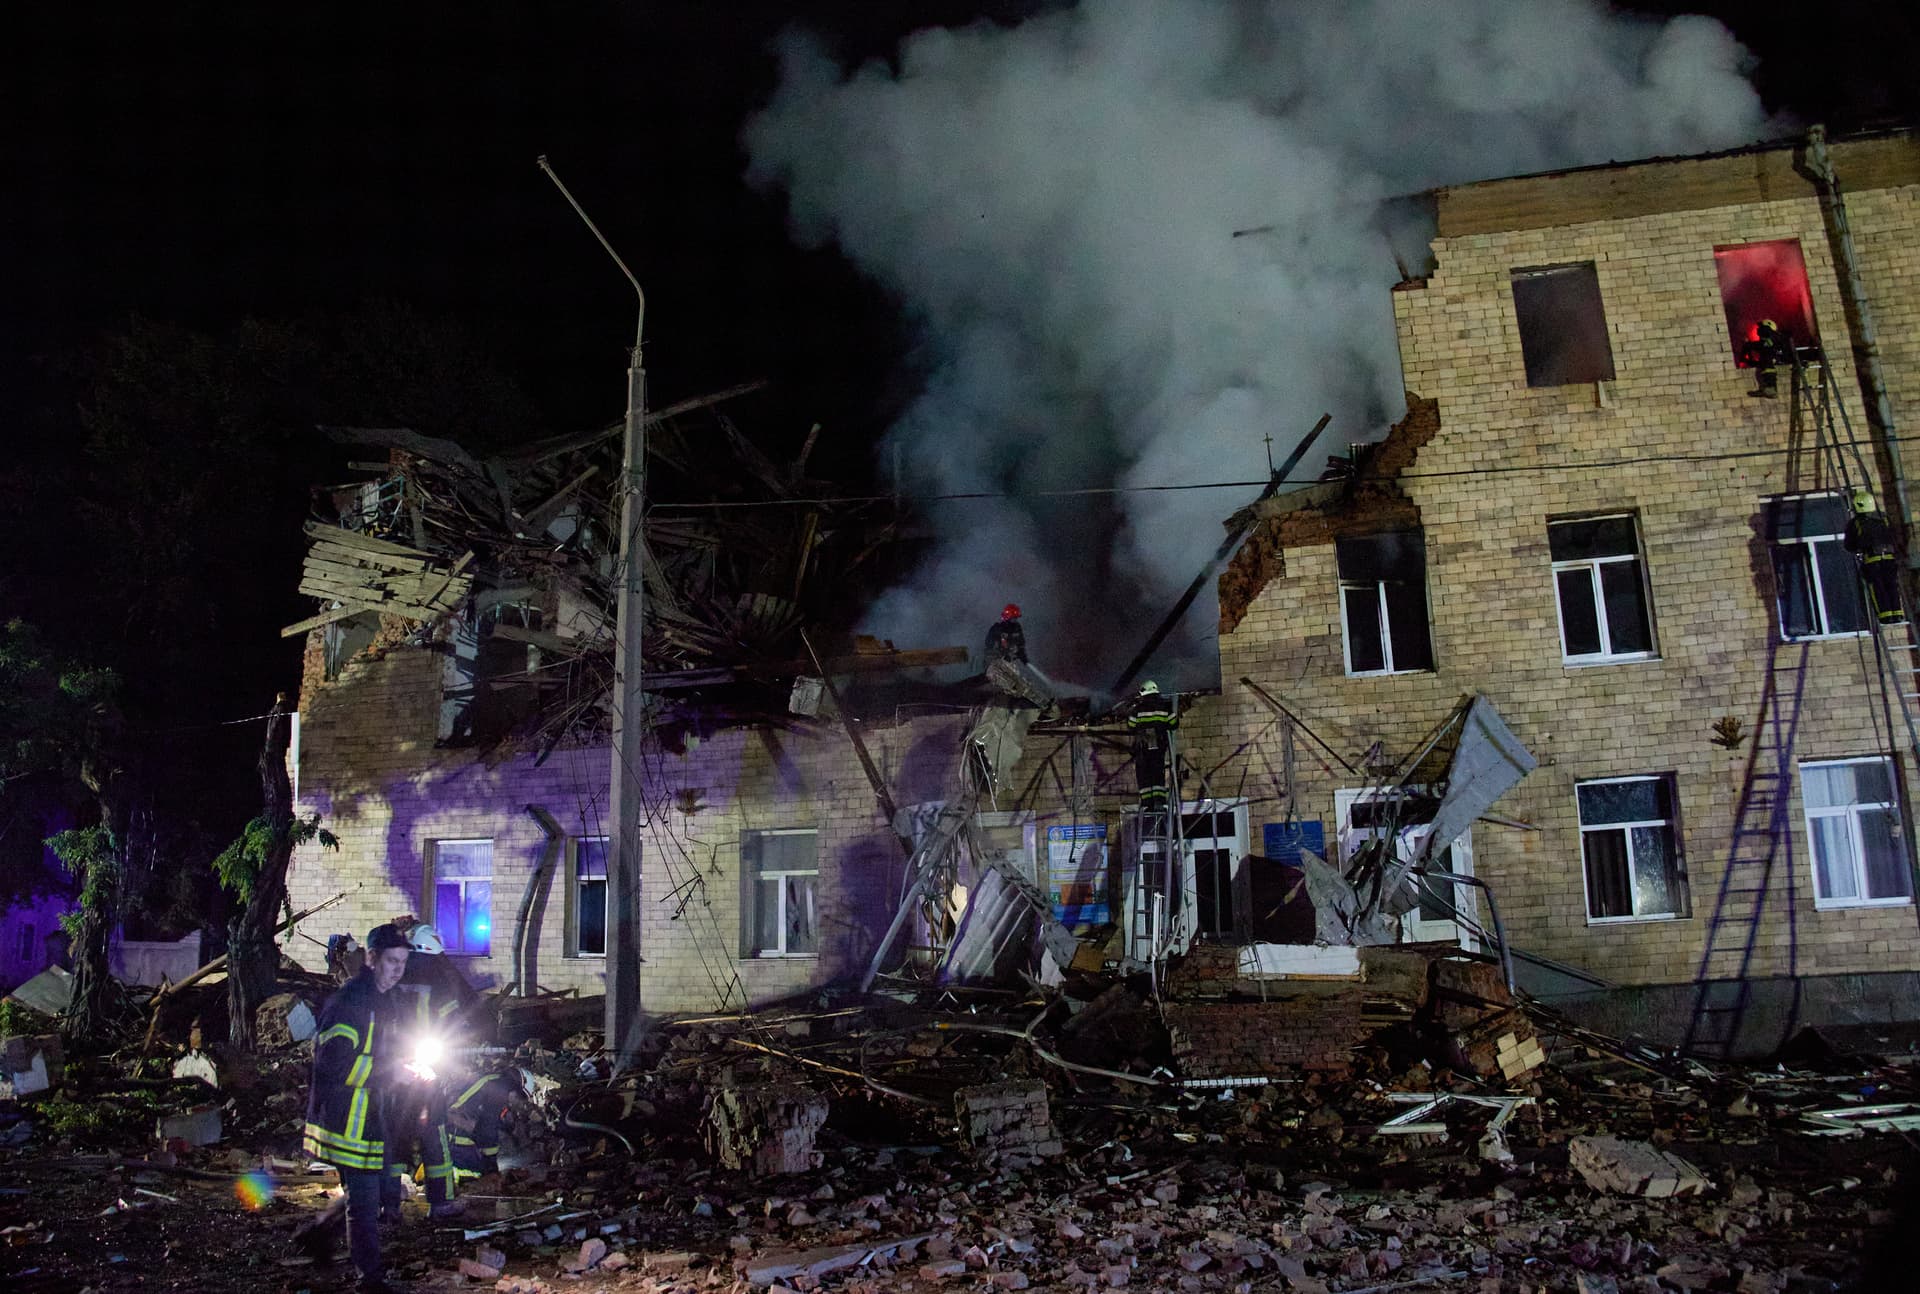 Ukrainian rescuers work at the site of a residential building in Kharkiv